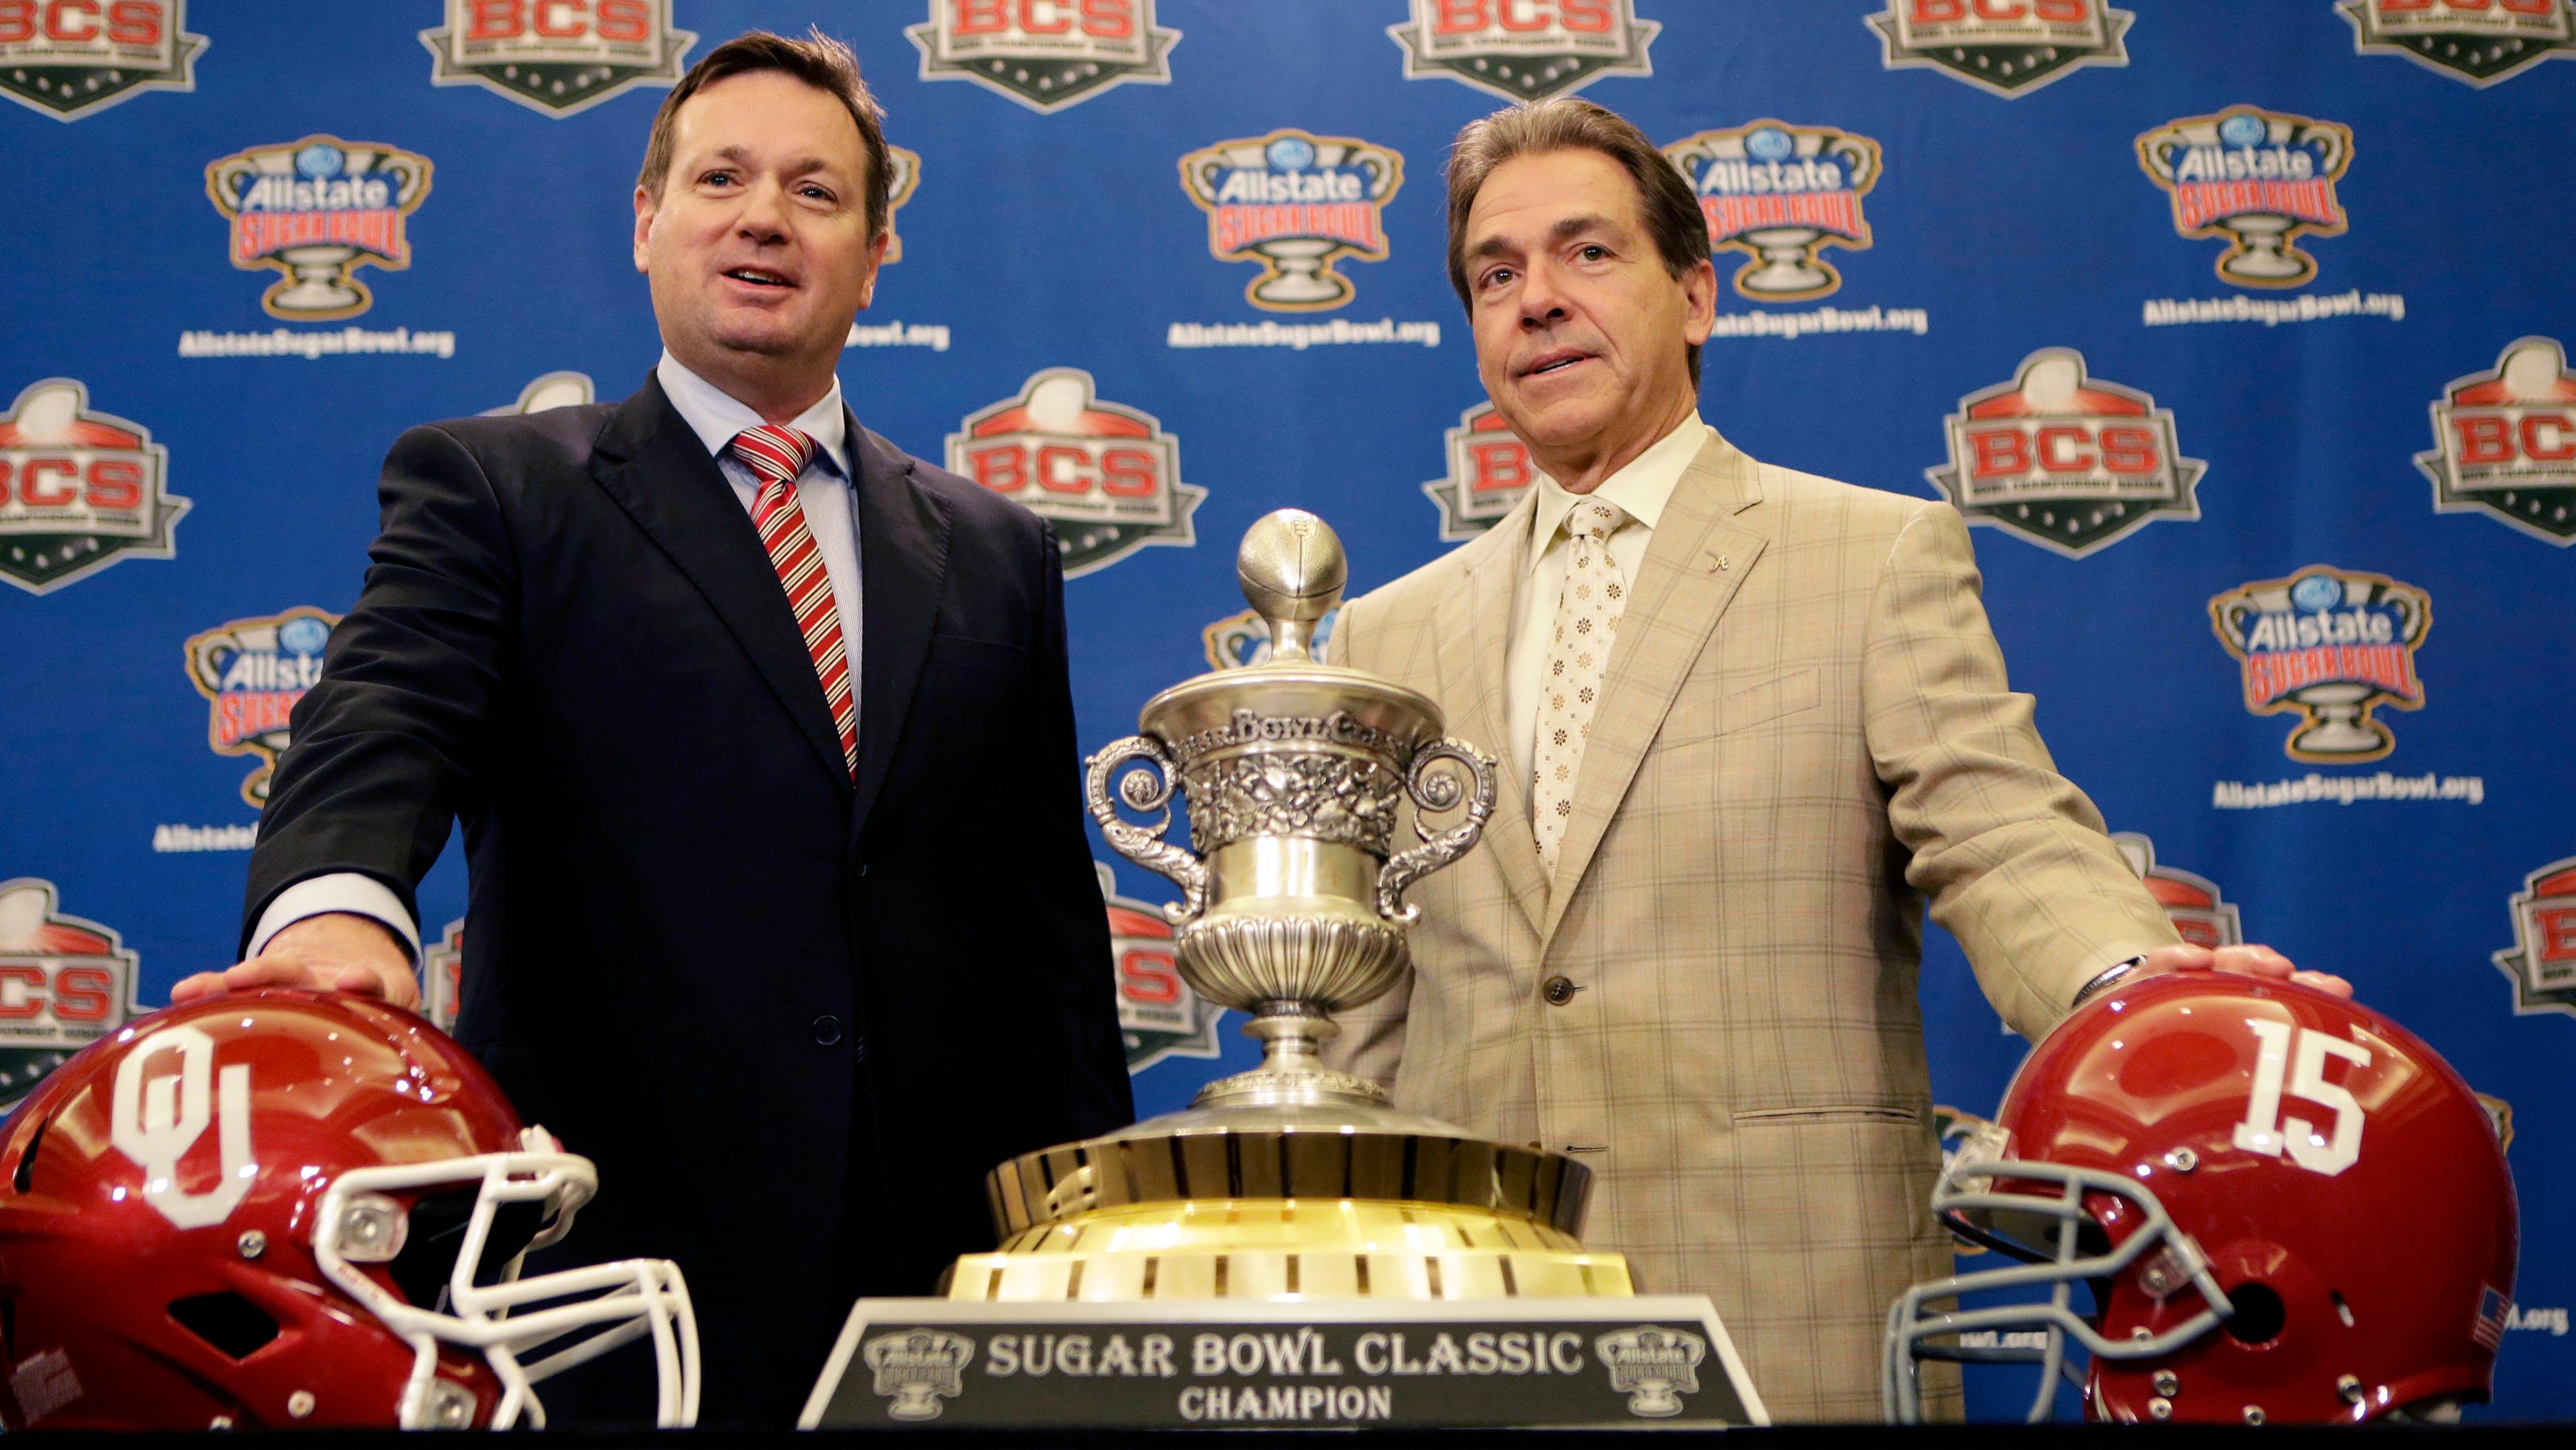 nick-saban-and-bob-stoops-uncle-once-missed-a-bar-robbery-because-they-were-talking-football